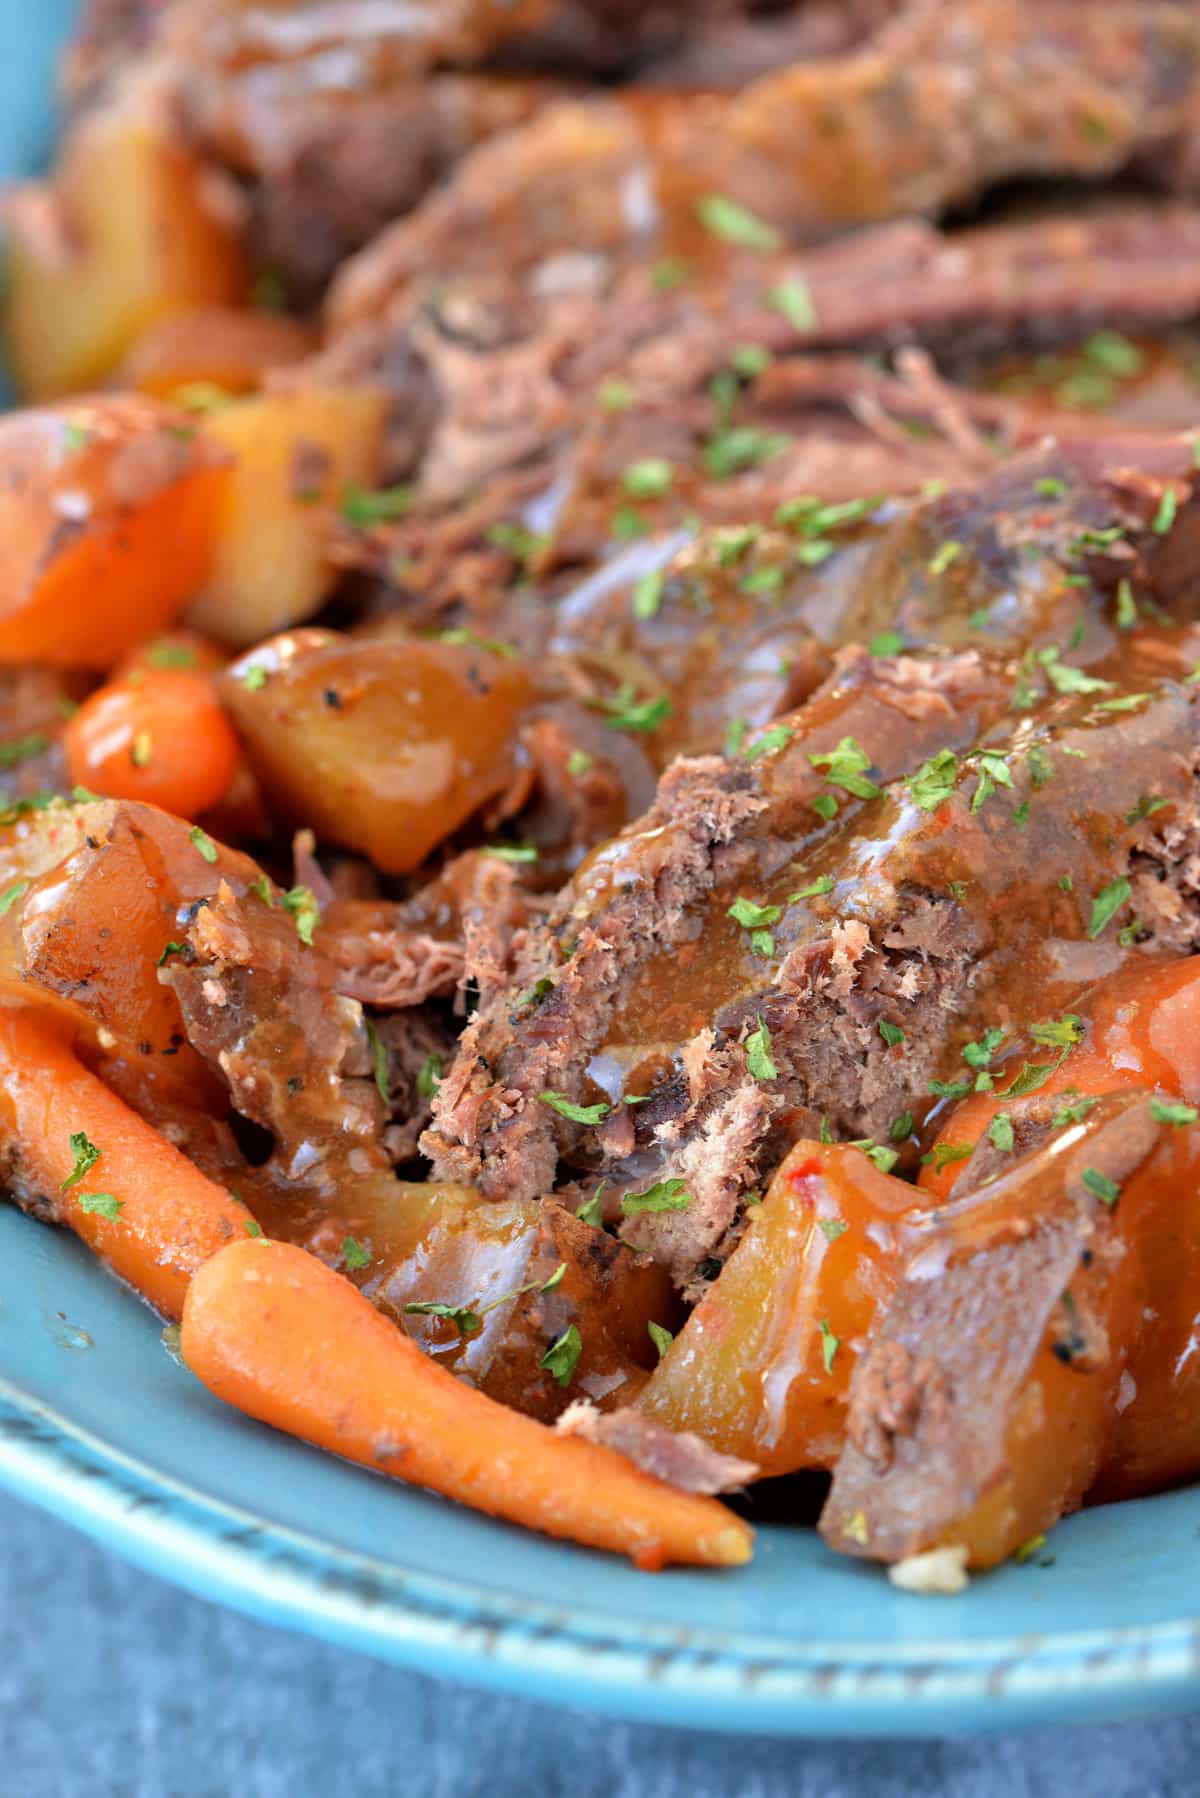 Slow Cooker Pot Roast with Video - The Gunny Sack